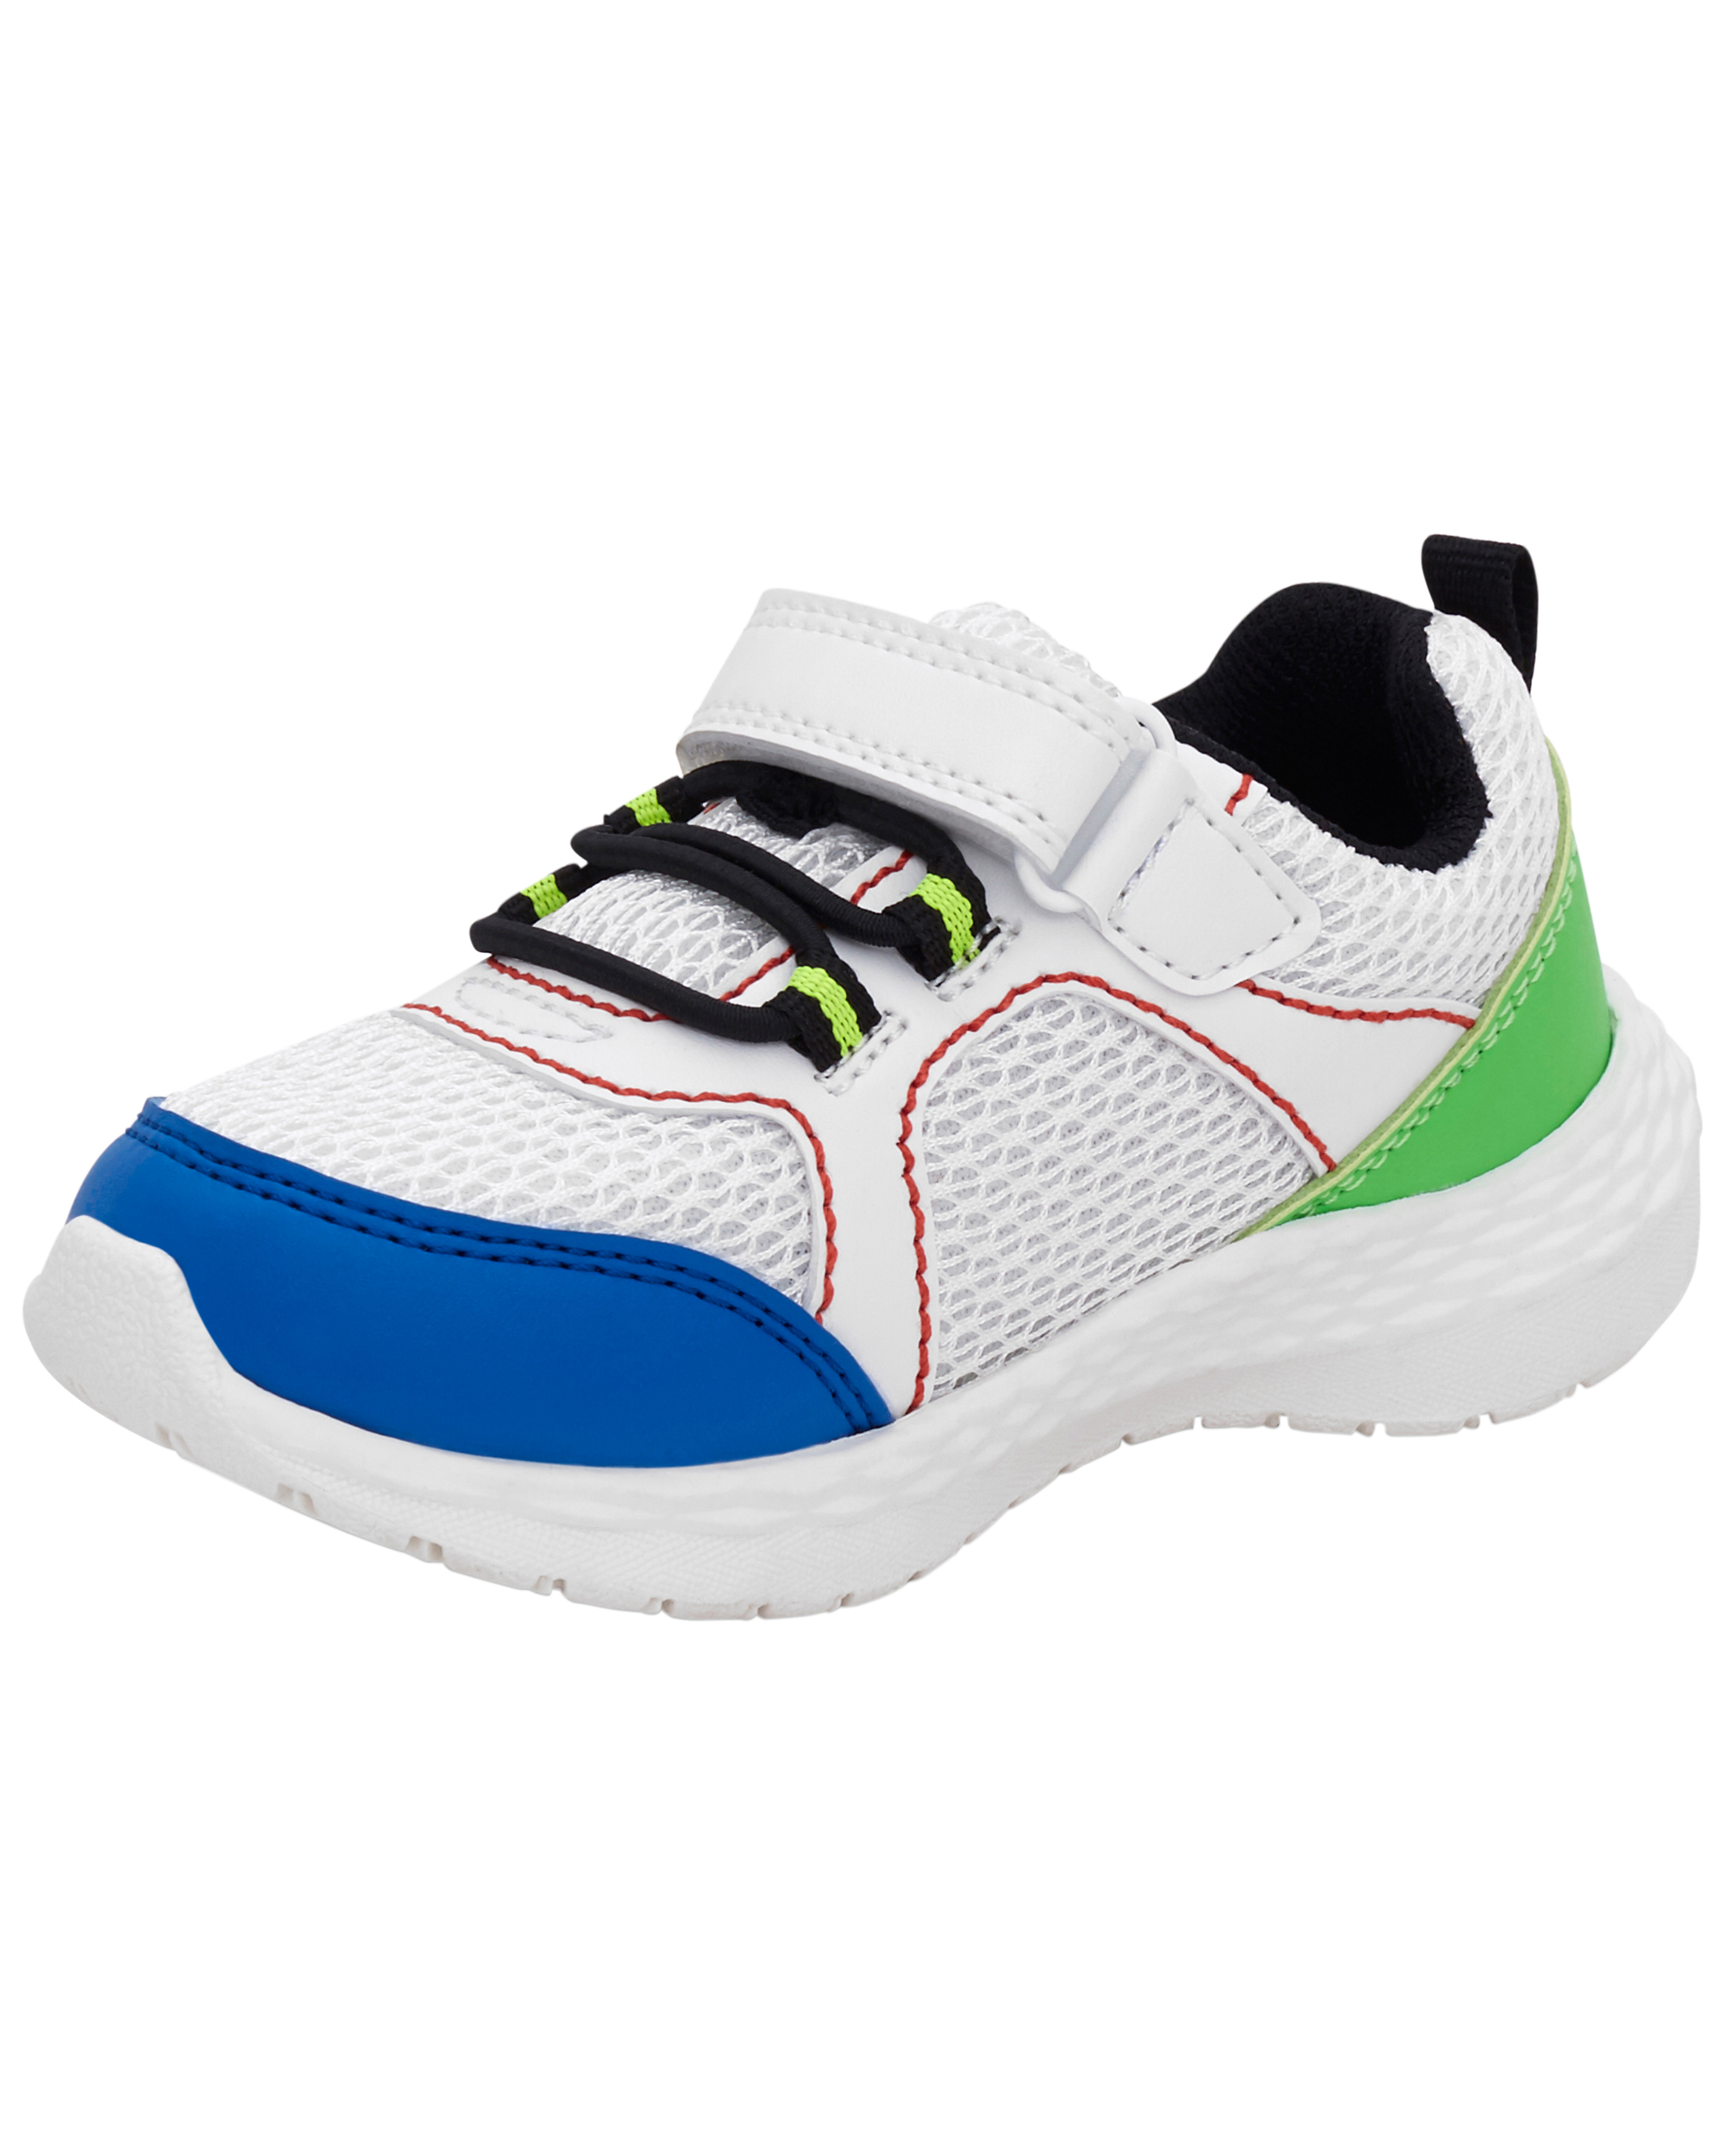 Toddler Athletic Sneakers